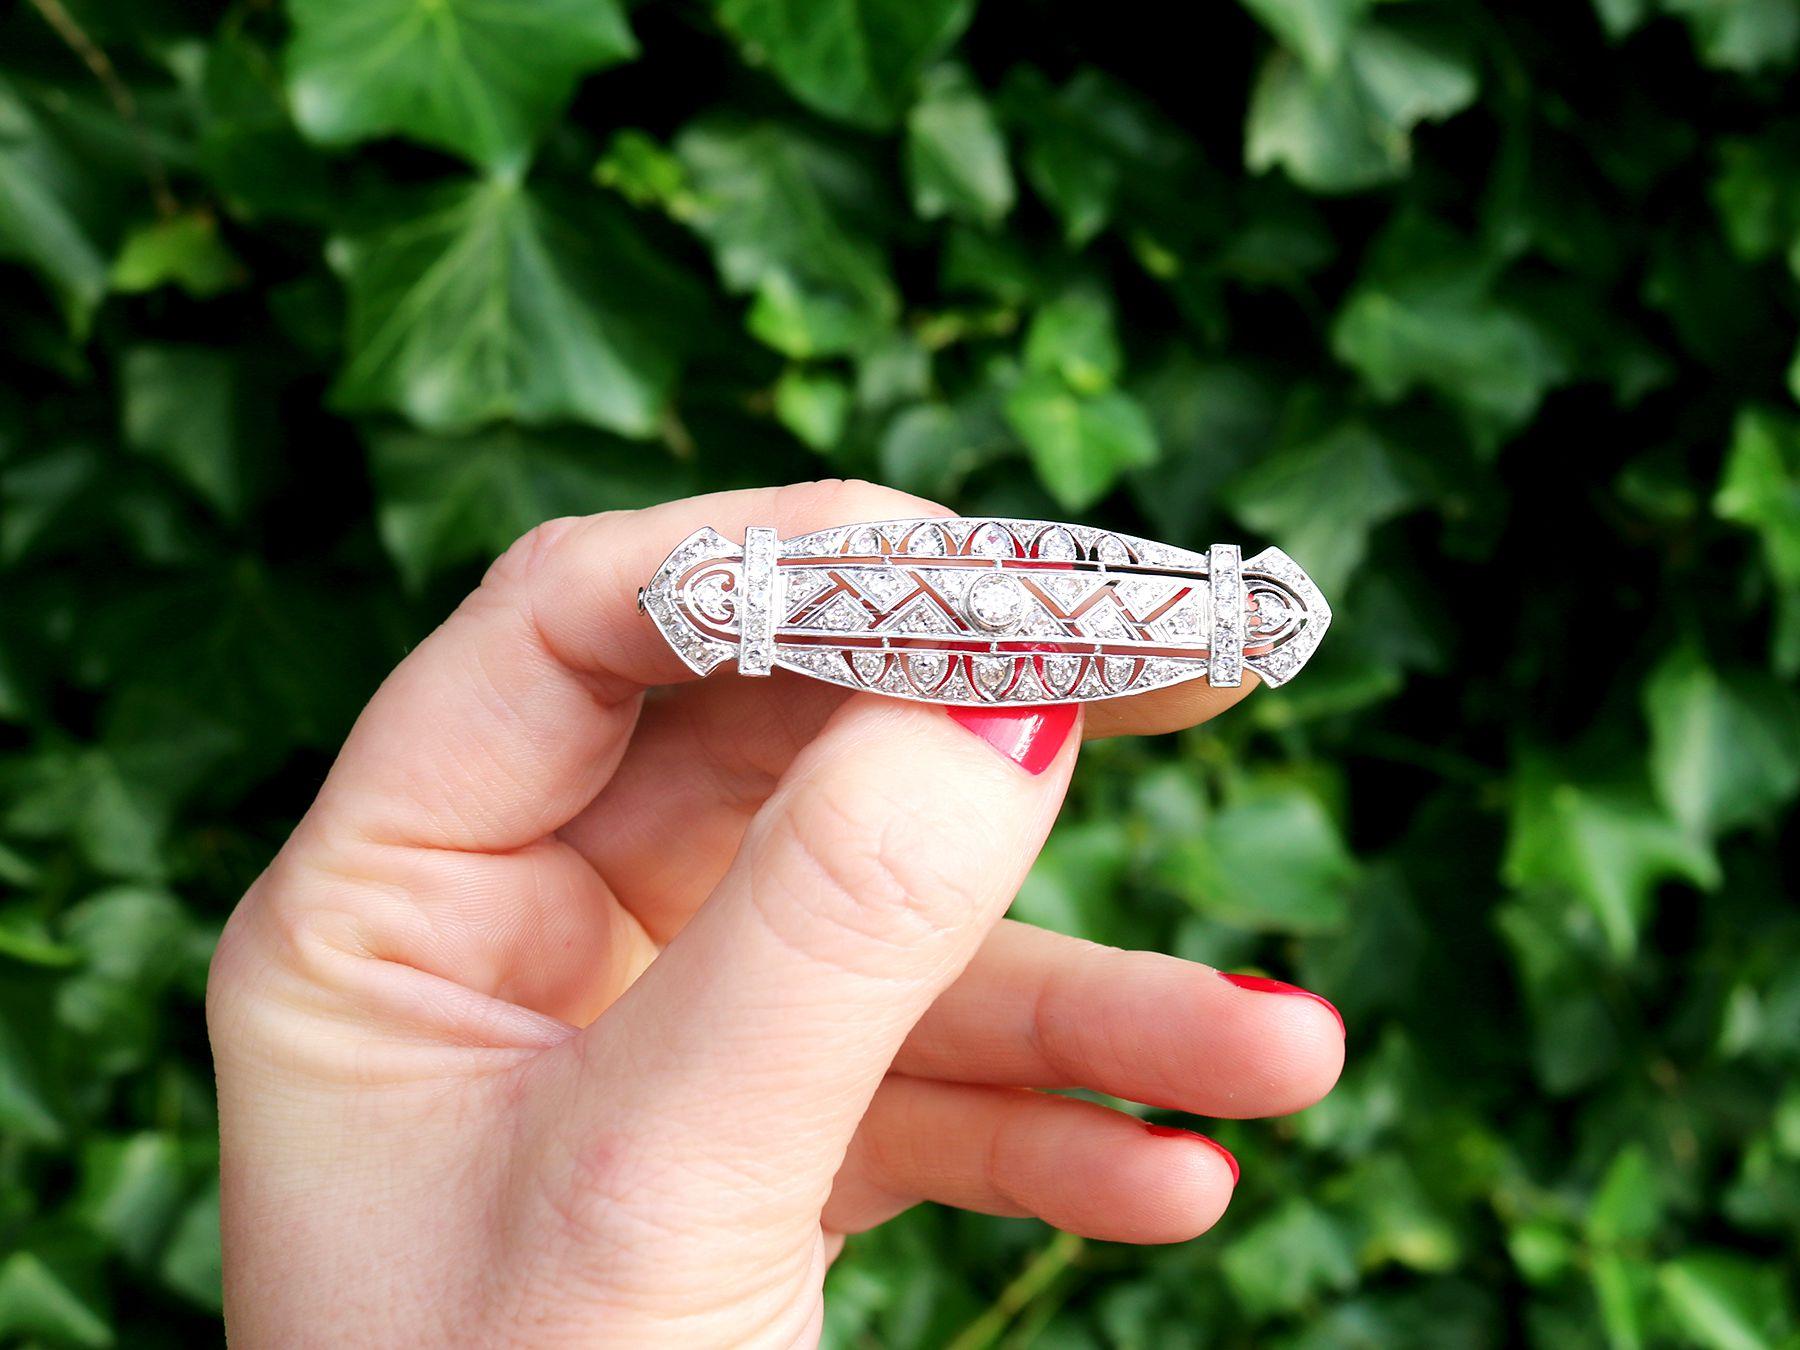 A stunning, fine and impressive antique Art Deco 2.13 carat diamond and platinum brooch; part of our diverse antique jewelry and estate jewelry collections.

This stunning, fine and impressive Art Deco brooch has been crafted in platinum.

The